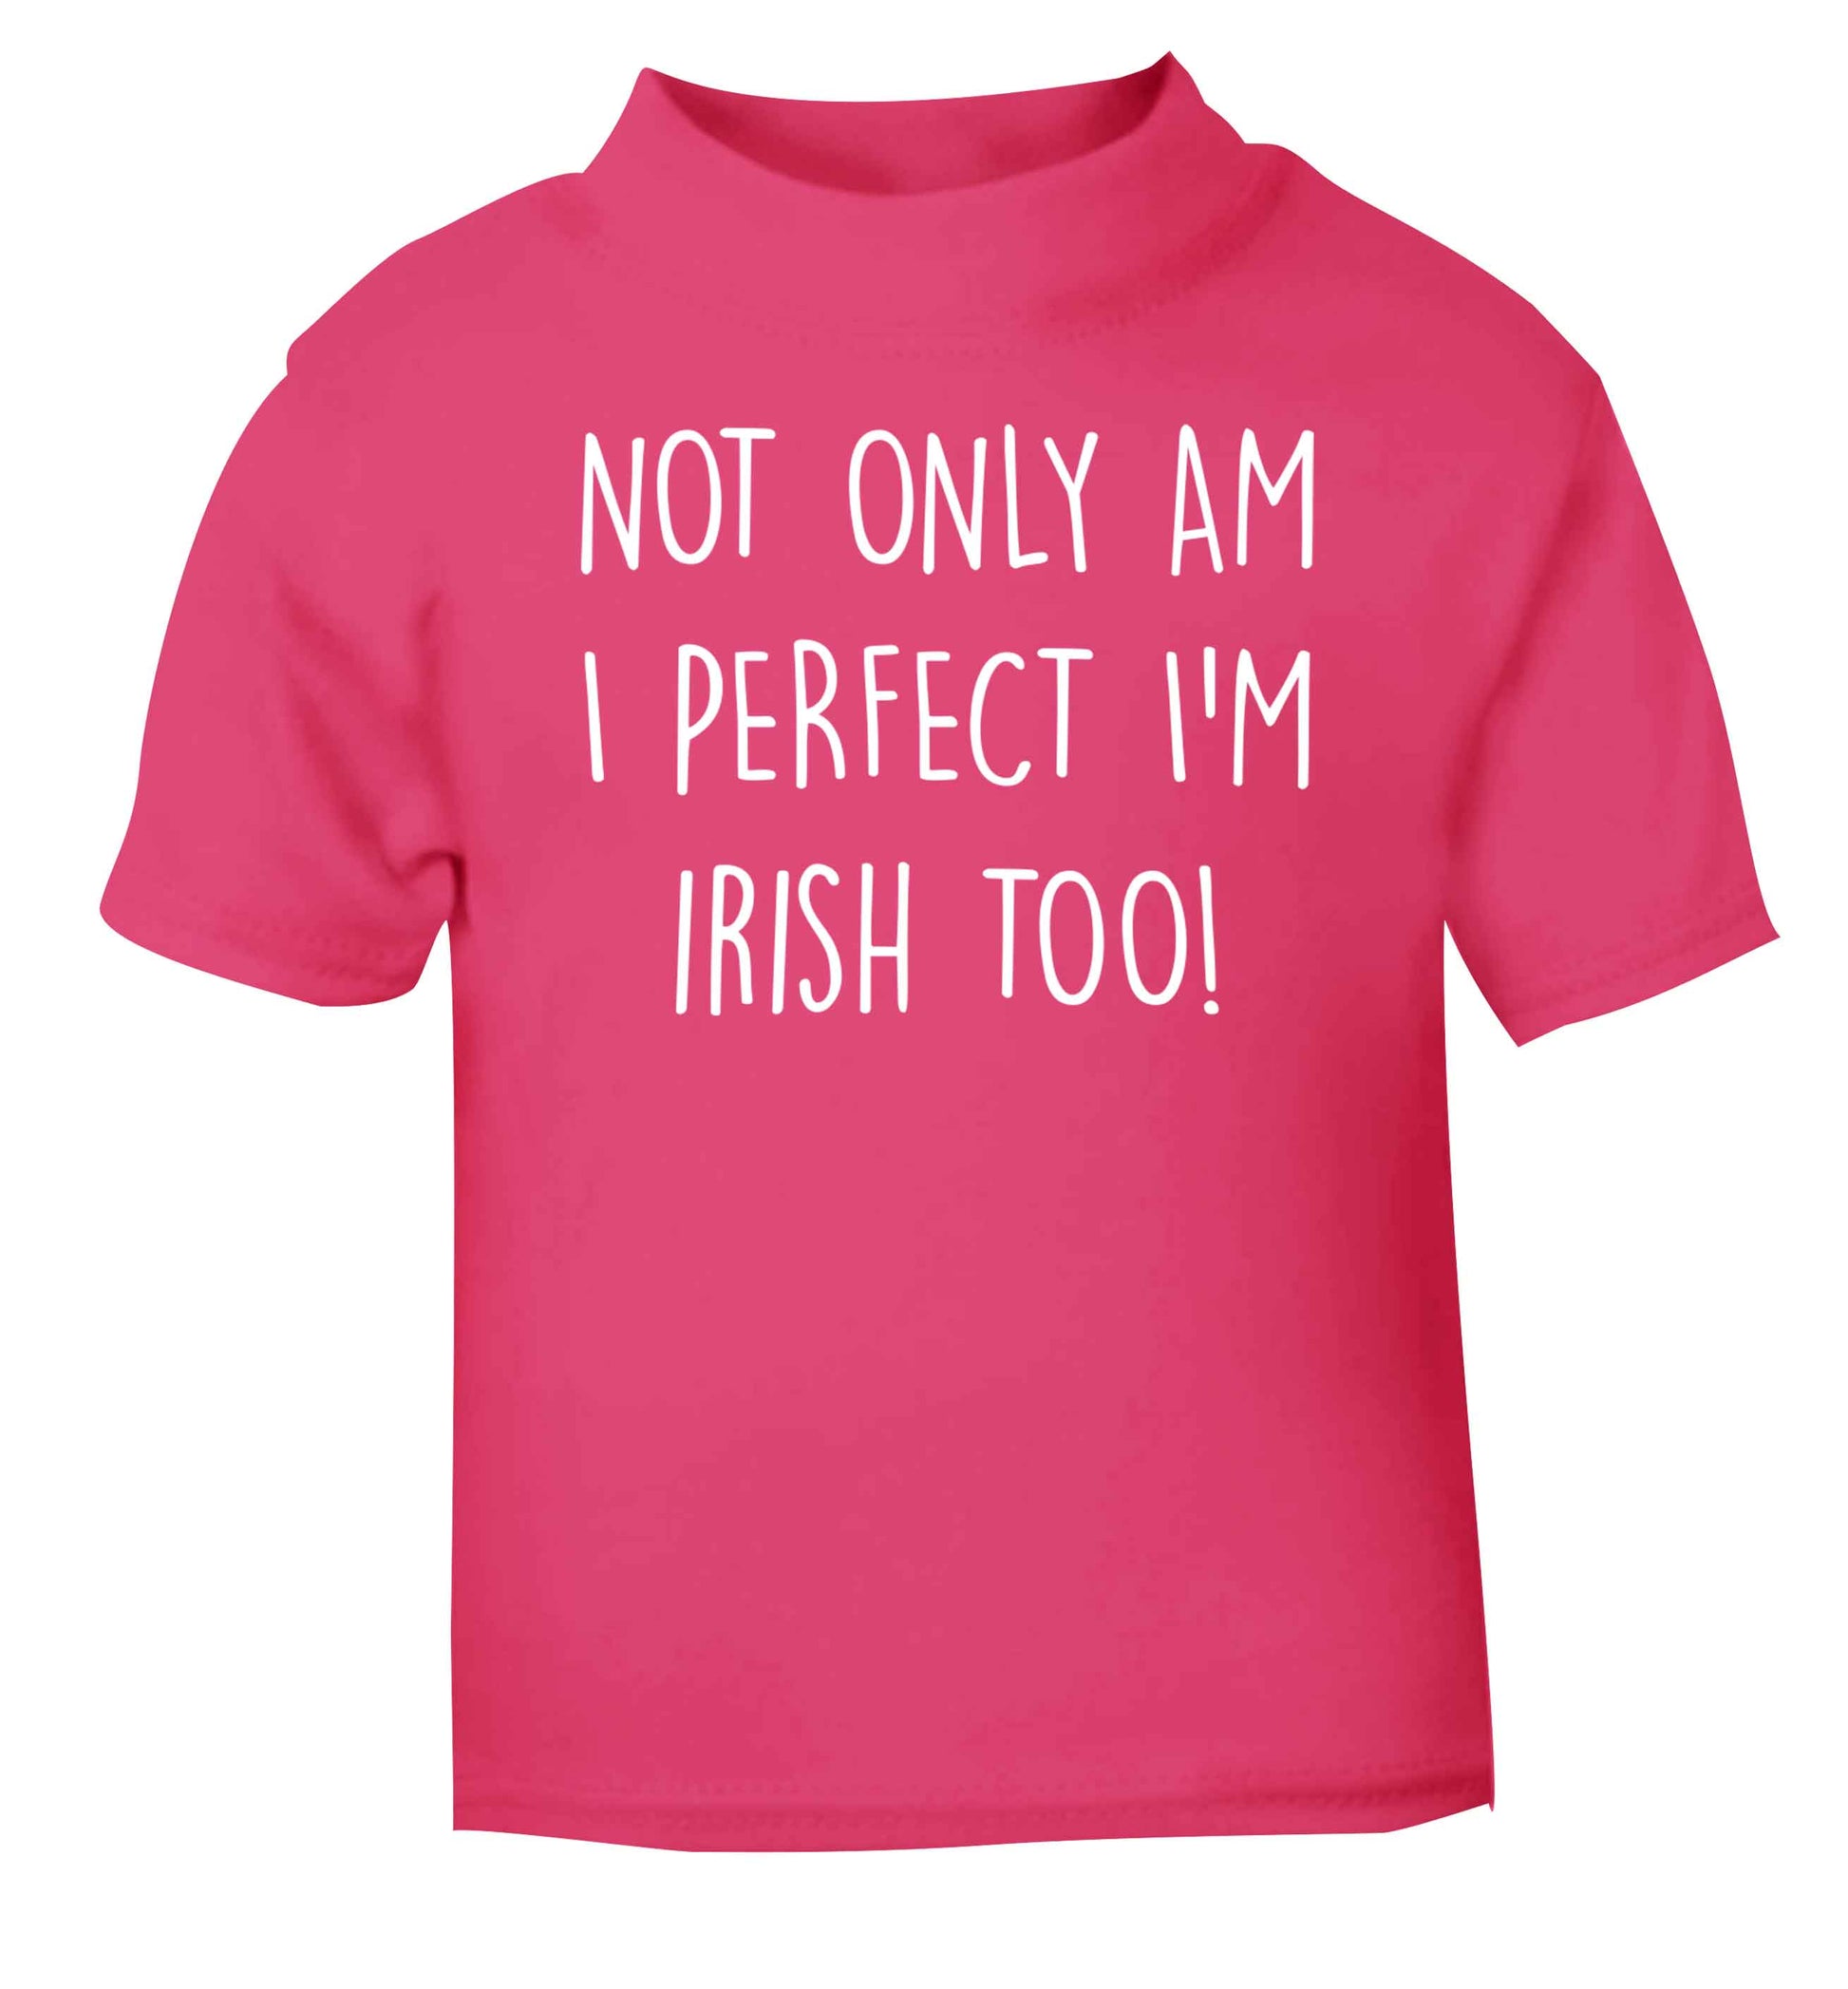 Not only am I perfect I'm Irish too! pink baby toddler Tshirt 2 Years